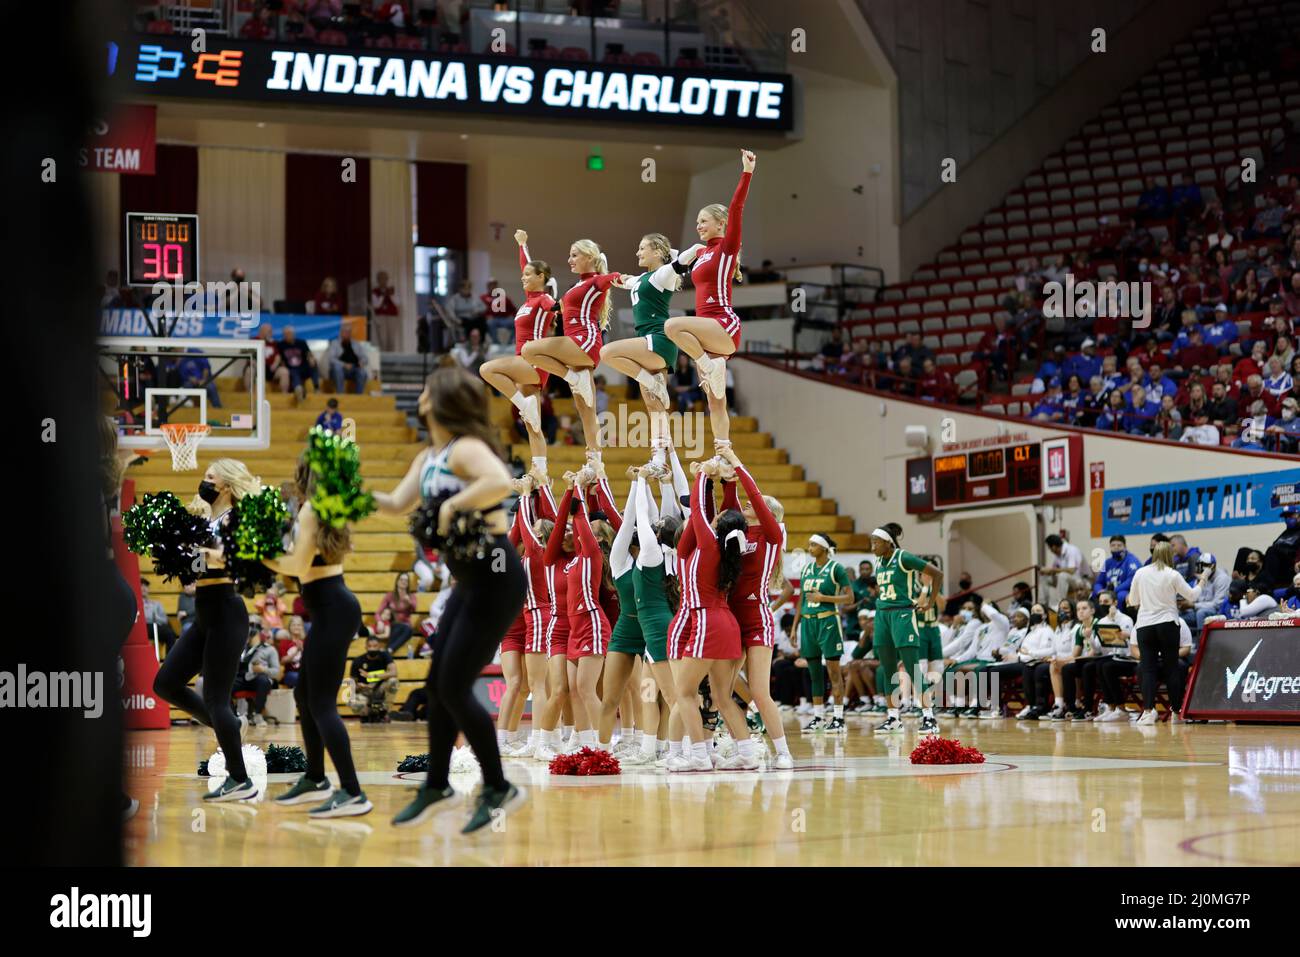 Bloomington, United States. 19th Mar, 2022. Indiana and Charlotte cheerleaders make a formation together during round 1 of the 2022 Division 1 Women's Basketball Championship, at Simon Skjodt Assembly Hall in Bloomington. Indiana University beat Charlotte 85-51. (Photo by Jeremy Hogan/SOPA Images/Sipa USA) Credit: Sipa USA/Alamy Live News Stock Photo